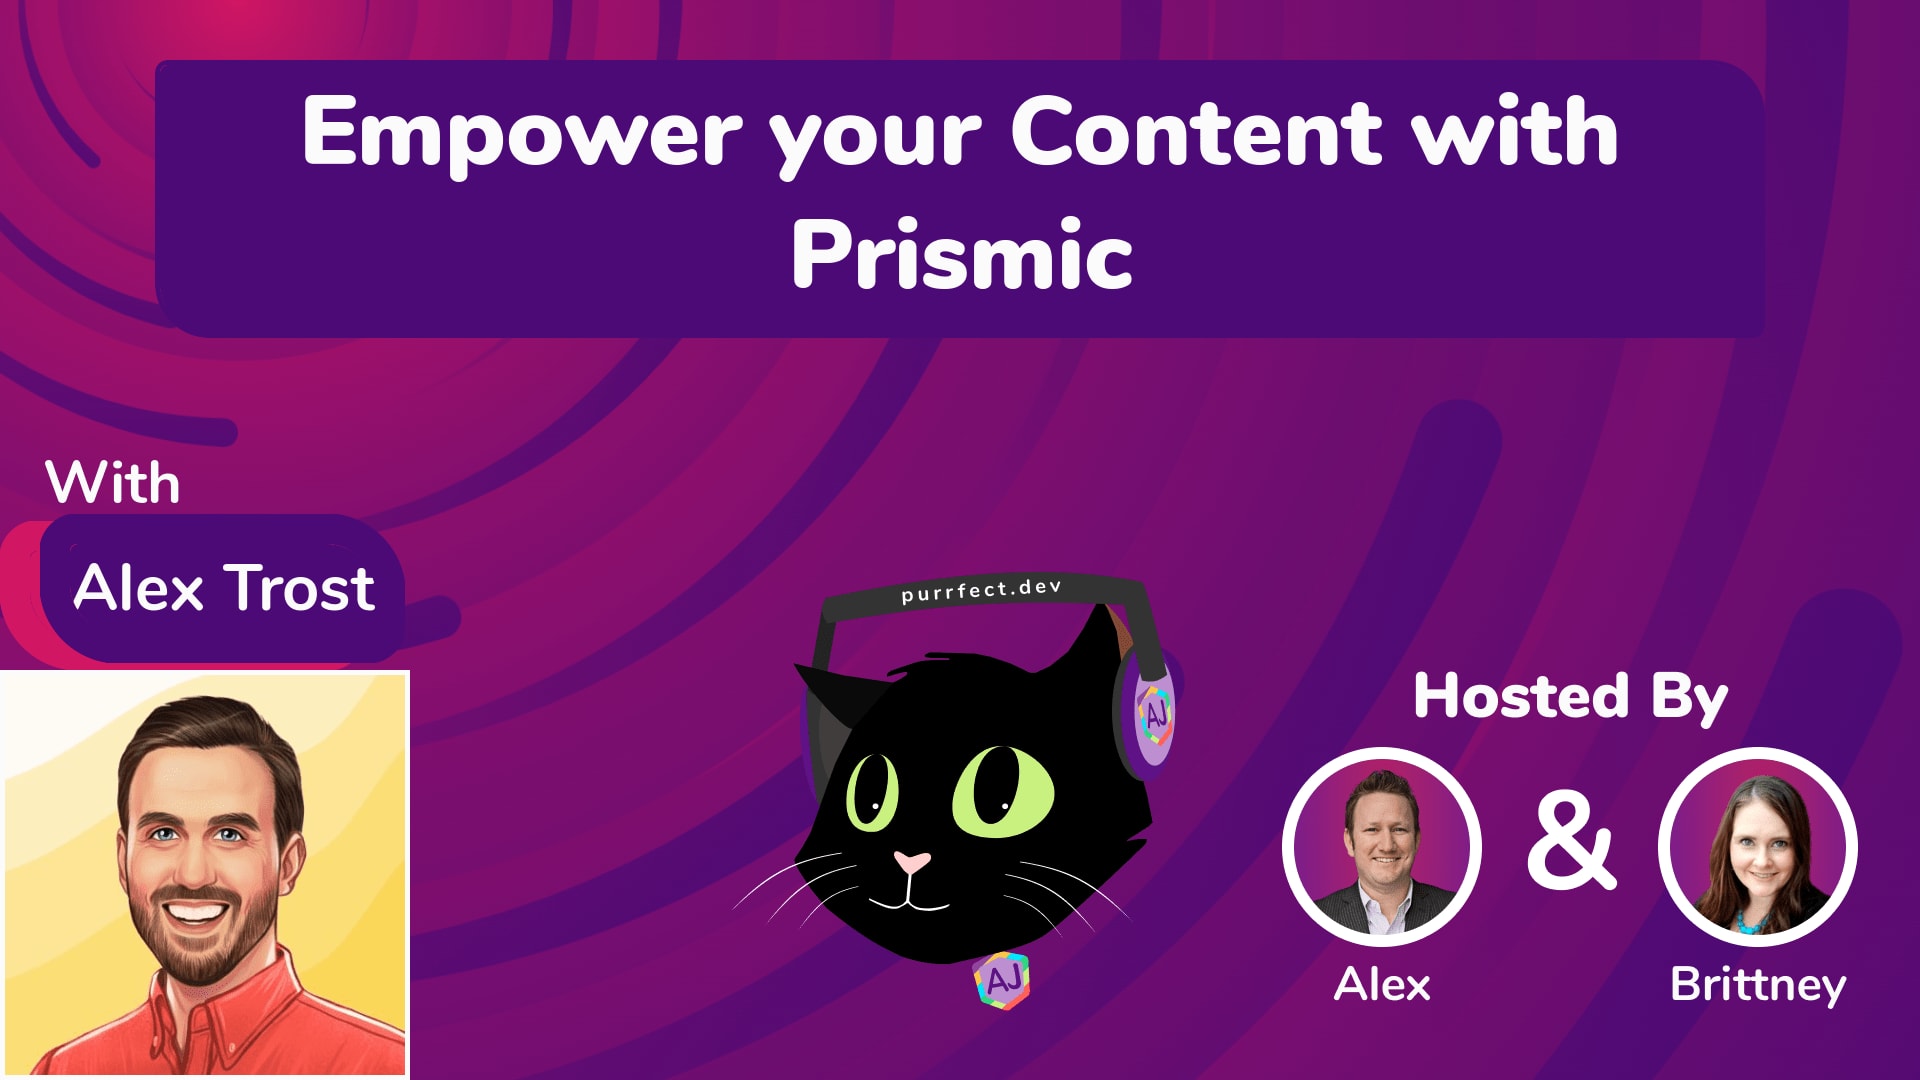 2.12 - Empower your Content with Prismic